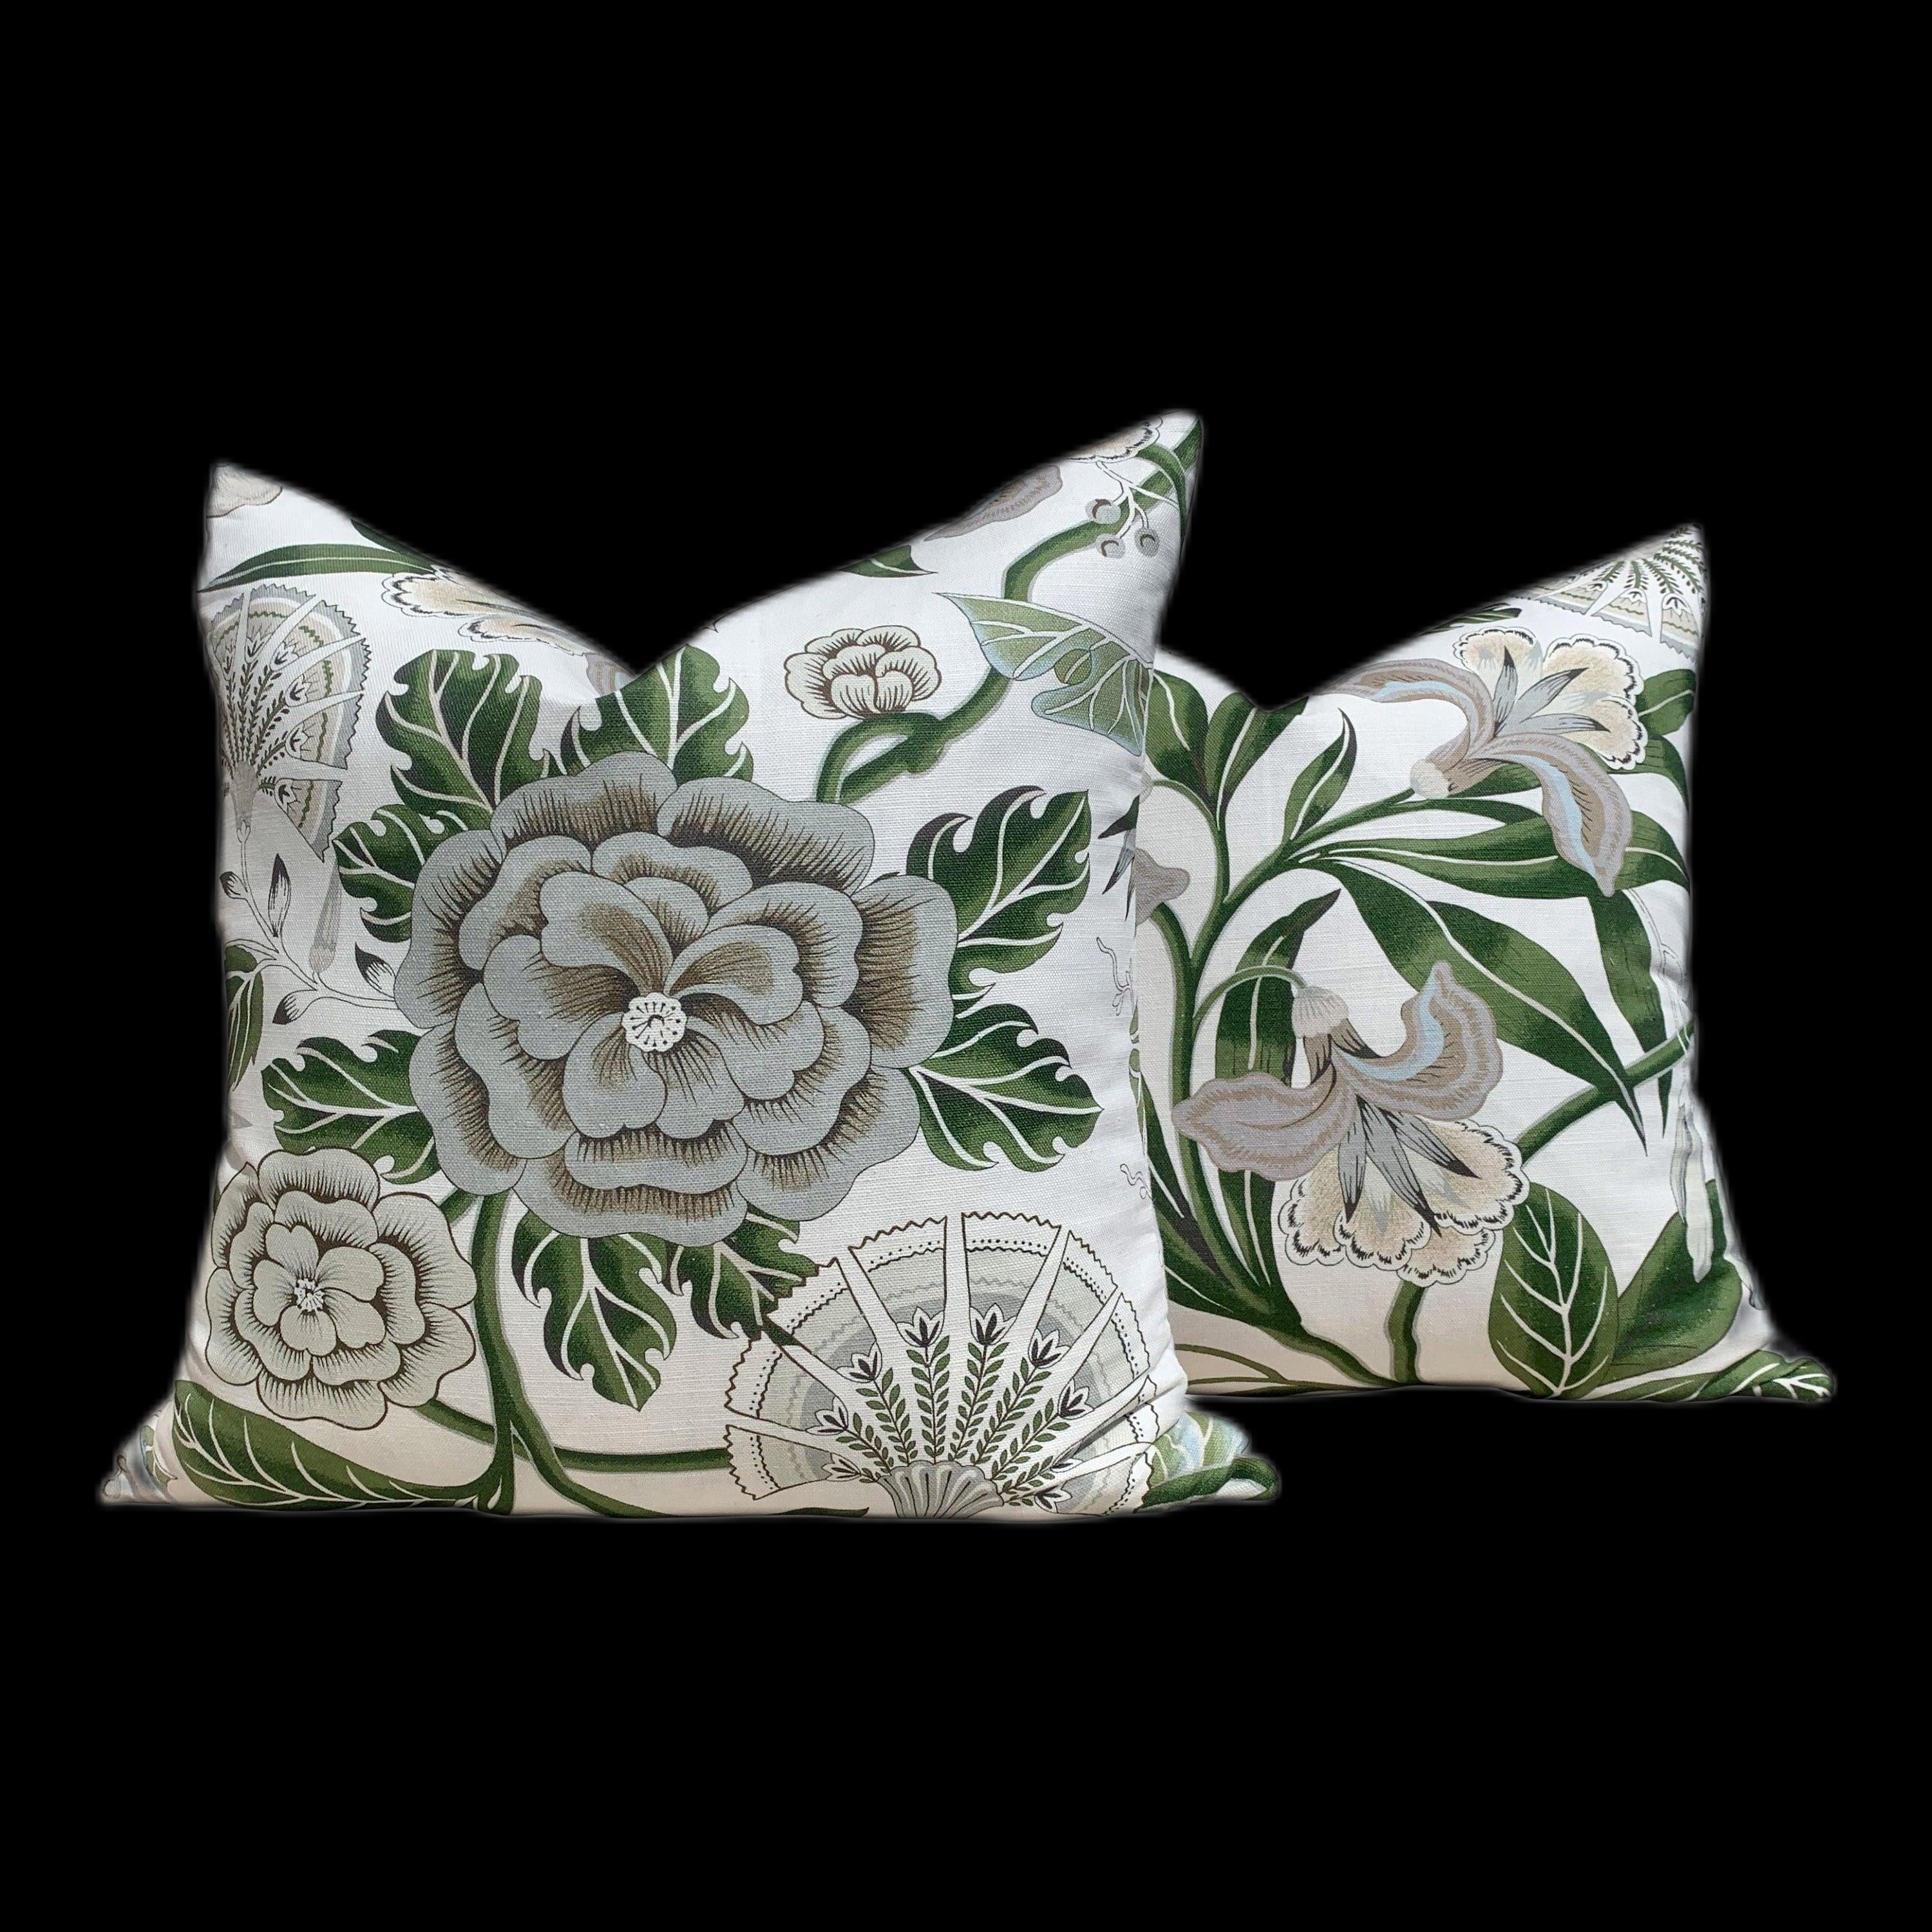 Thibaut Cleo Floral Pillow in Green and White. Decorative Lumbar Pillow in Green. Accent Throw Pillow.